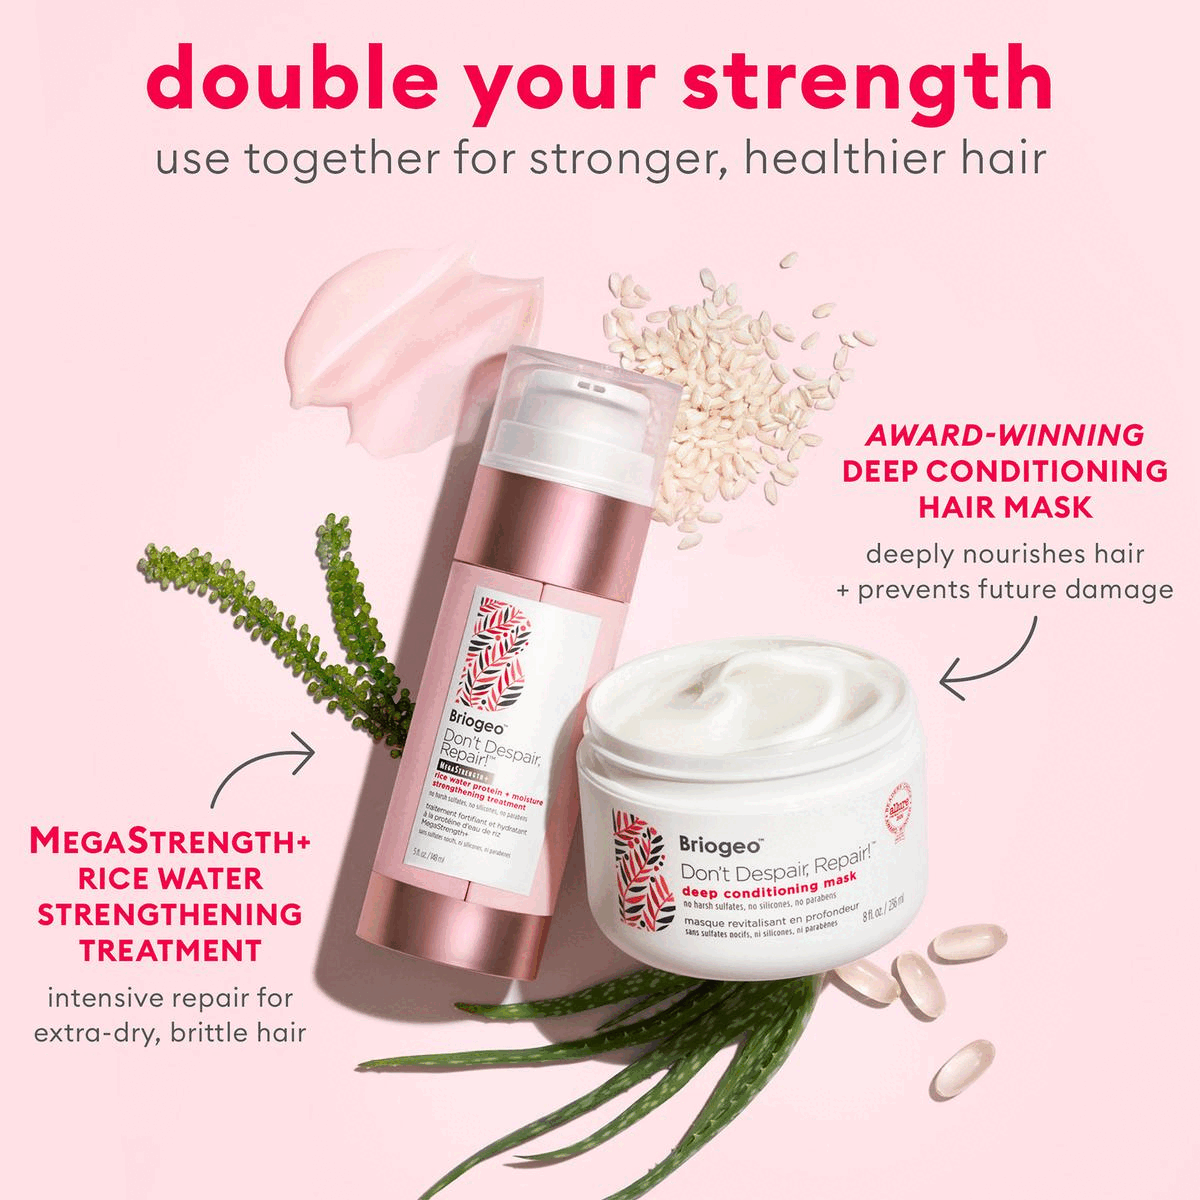 Image 1, double your strength. Image 2, 6 free hair care - no harsh sulfates, no silicones, no parabens, no phthalates, no articifical dyes, no DEA.